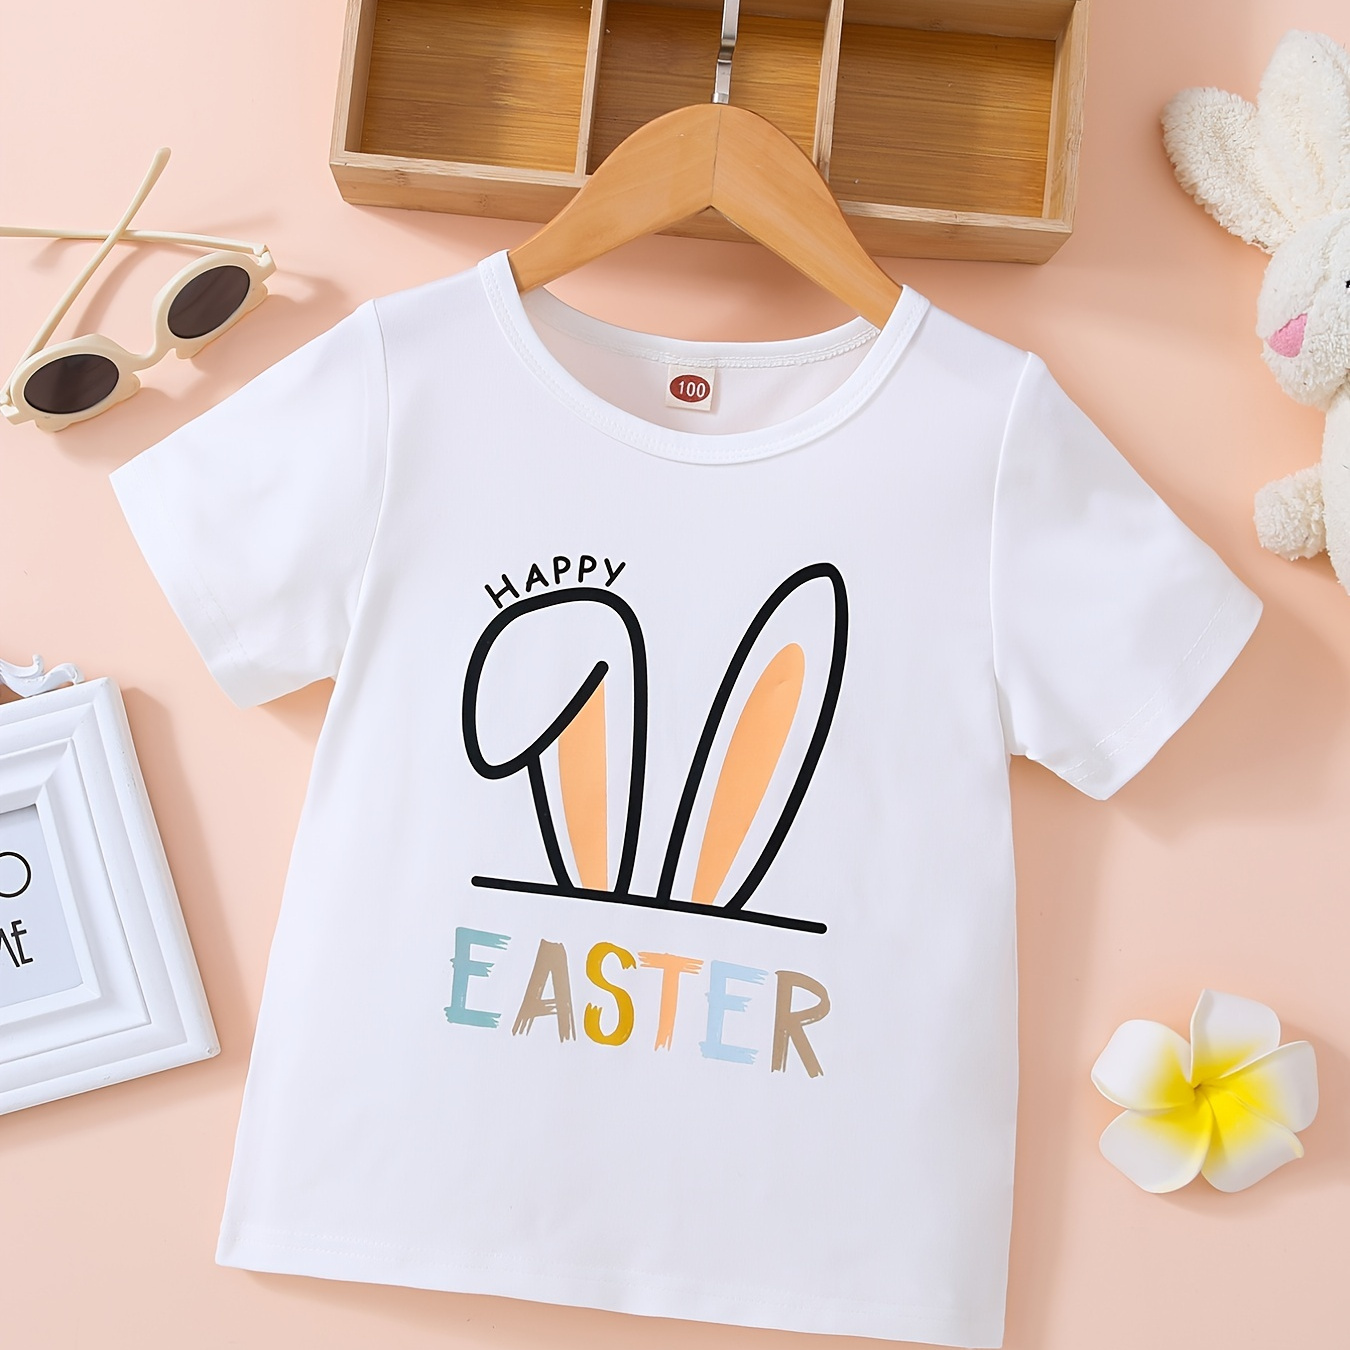 

happy Easter" Bunny Ear Round Neck T-shirt Tee Top Casual Soft Comfortable Boys And Girls Summer Clothes